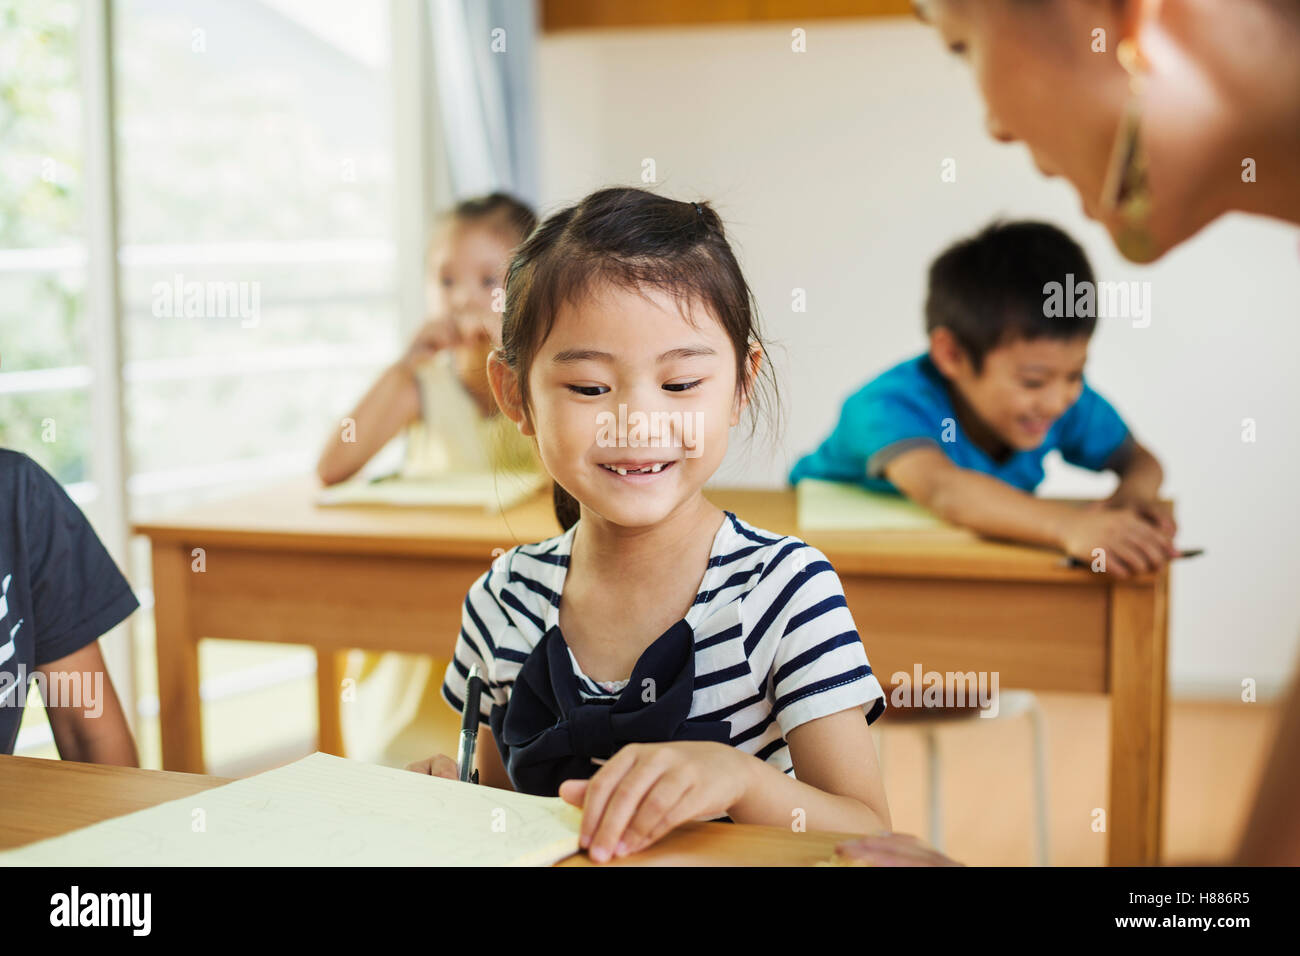 A group of children in a school classroom with their teacher. Stock Photo